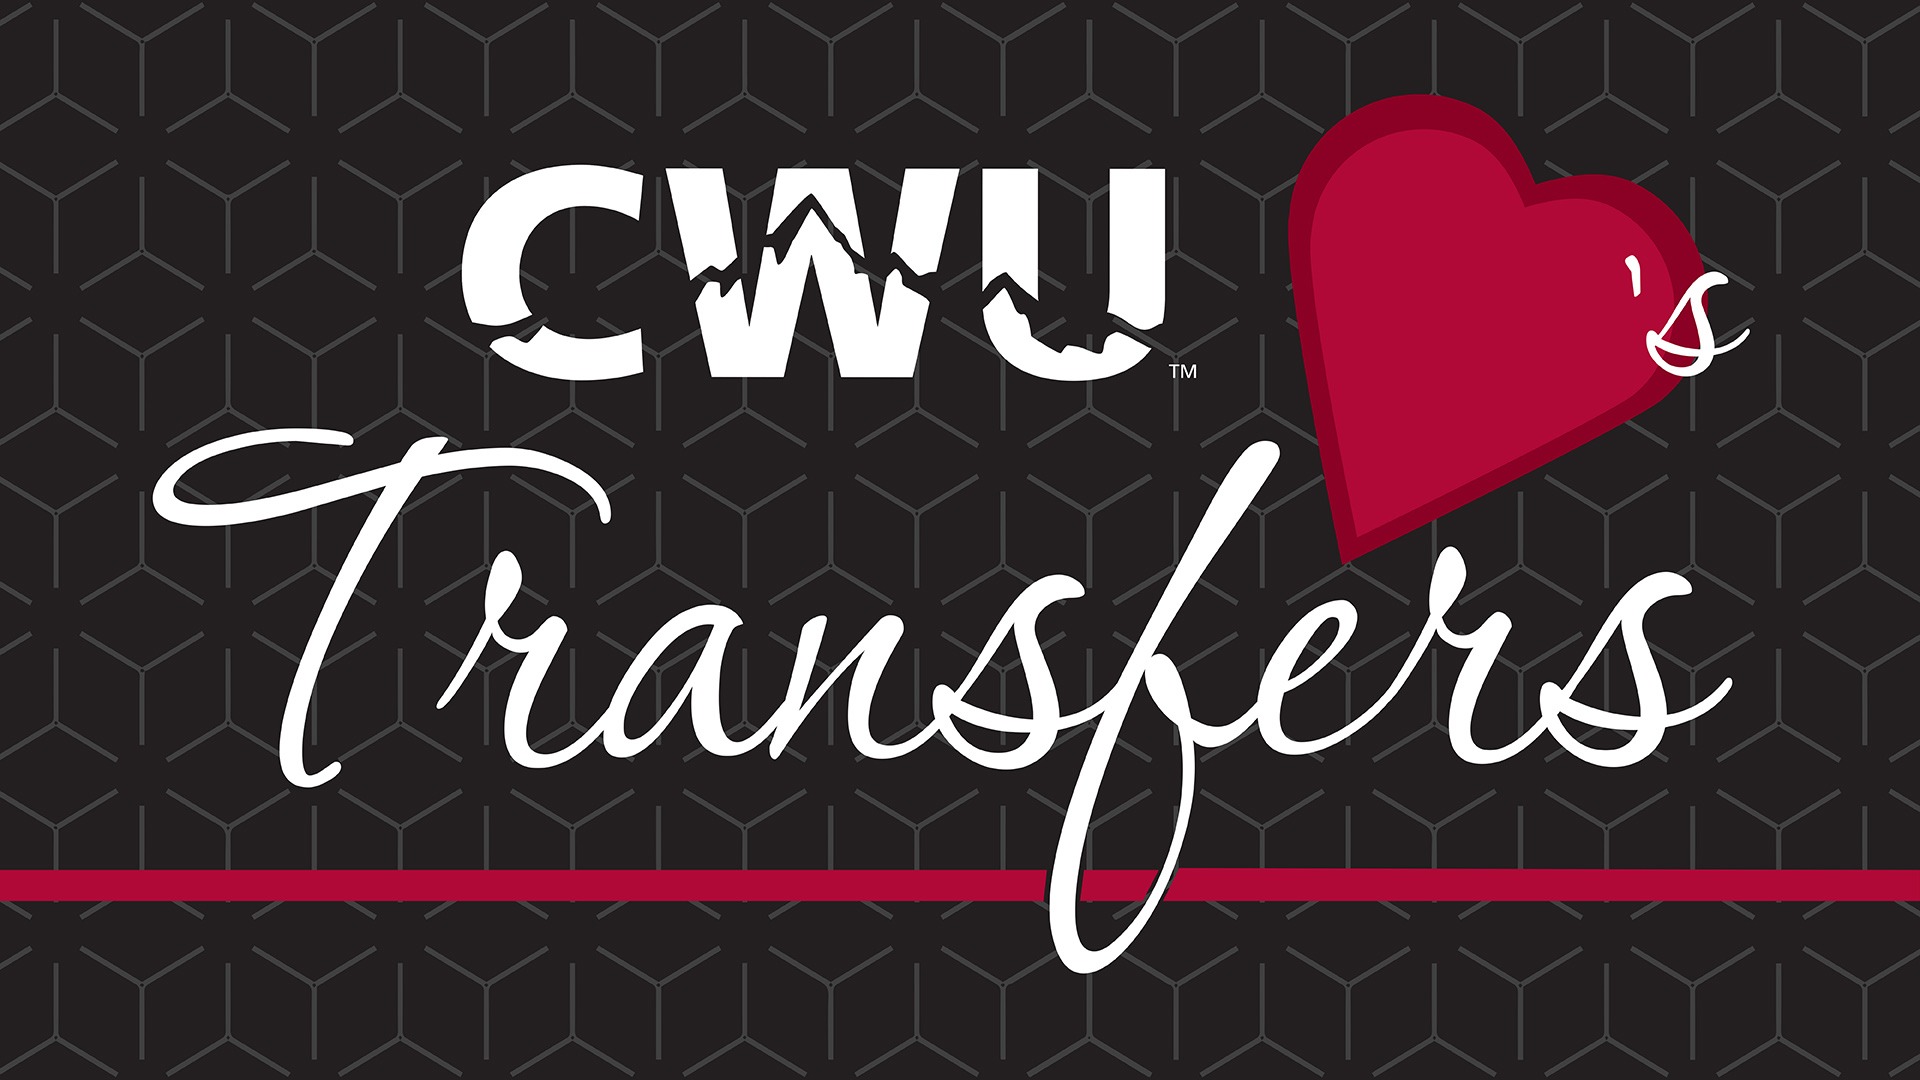 A black background image with gray squares and text saying "CWU loves transfers".